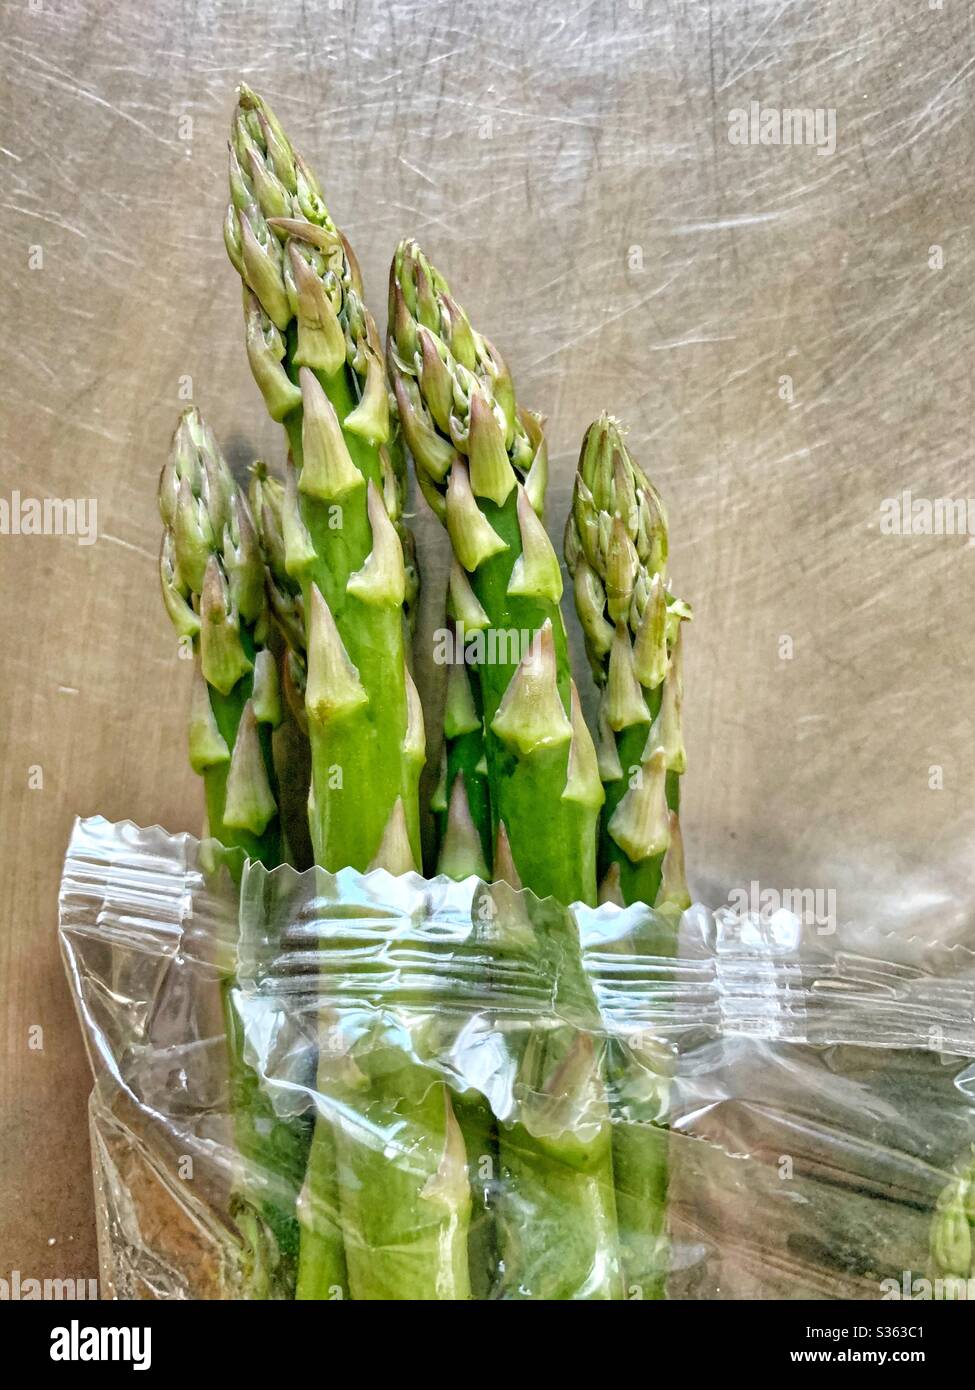 A pound of fresh Asparagus in plastic on table Stock Photo